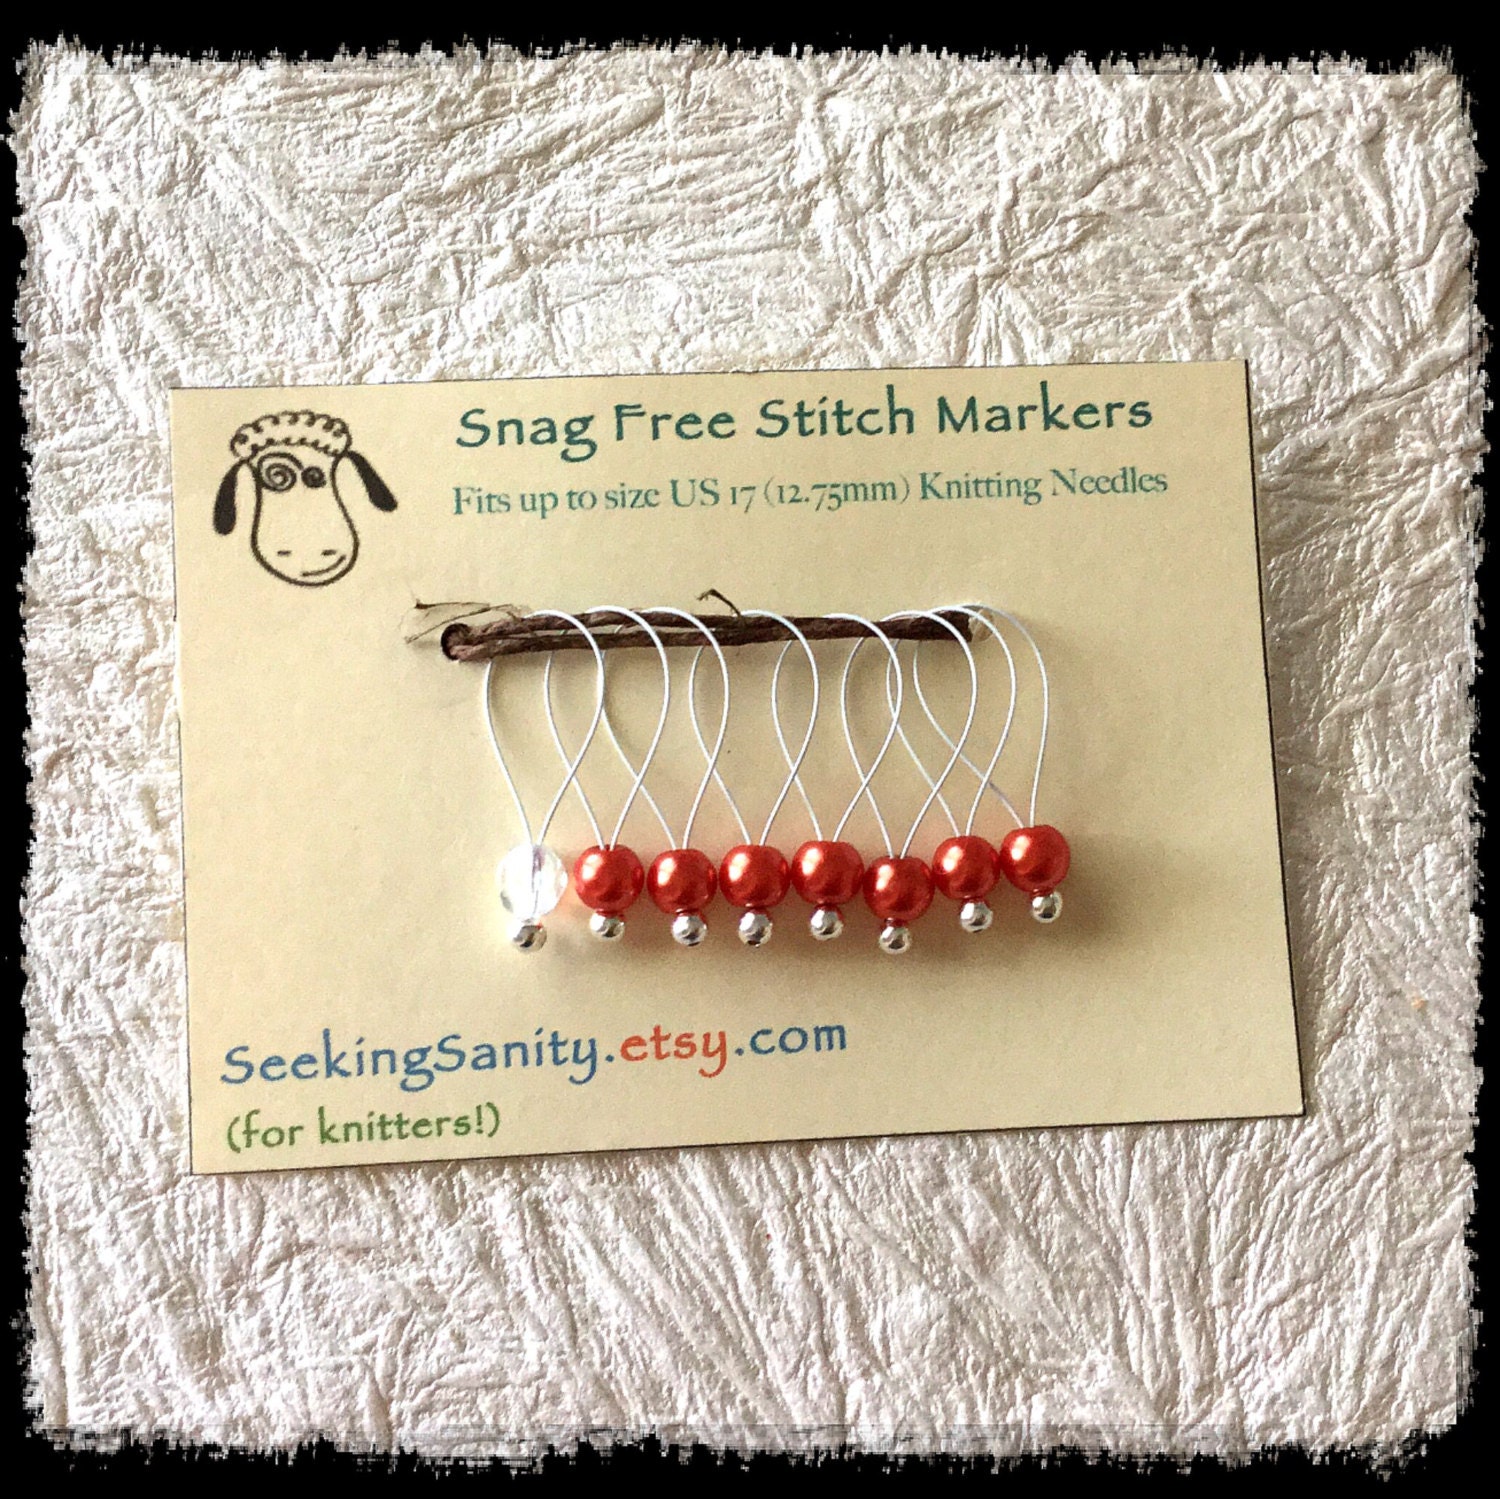 White Glass Pearls N43 Snag Free Stitch Markers Large Set of 8 12.75 Fits up to size US 17 Knitting Needle